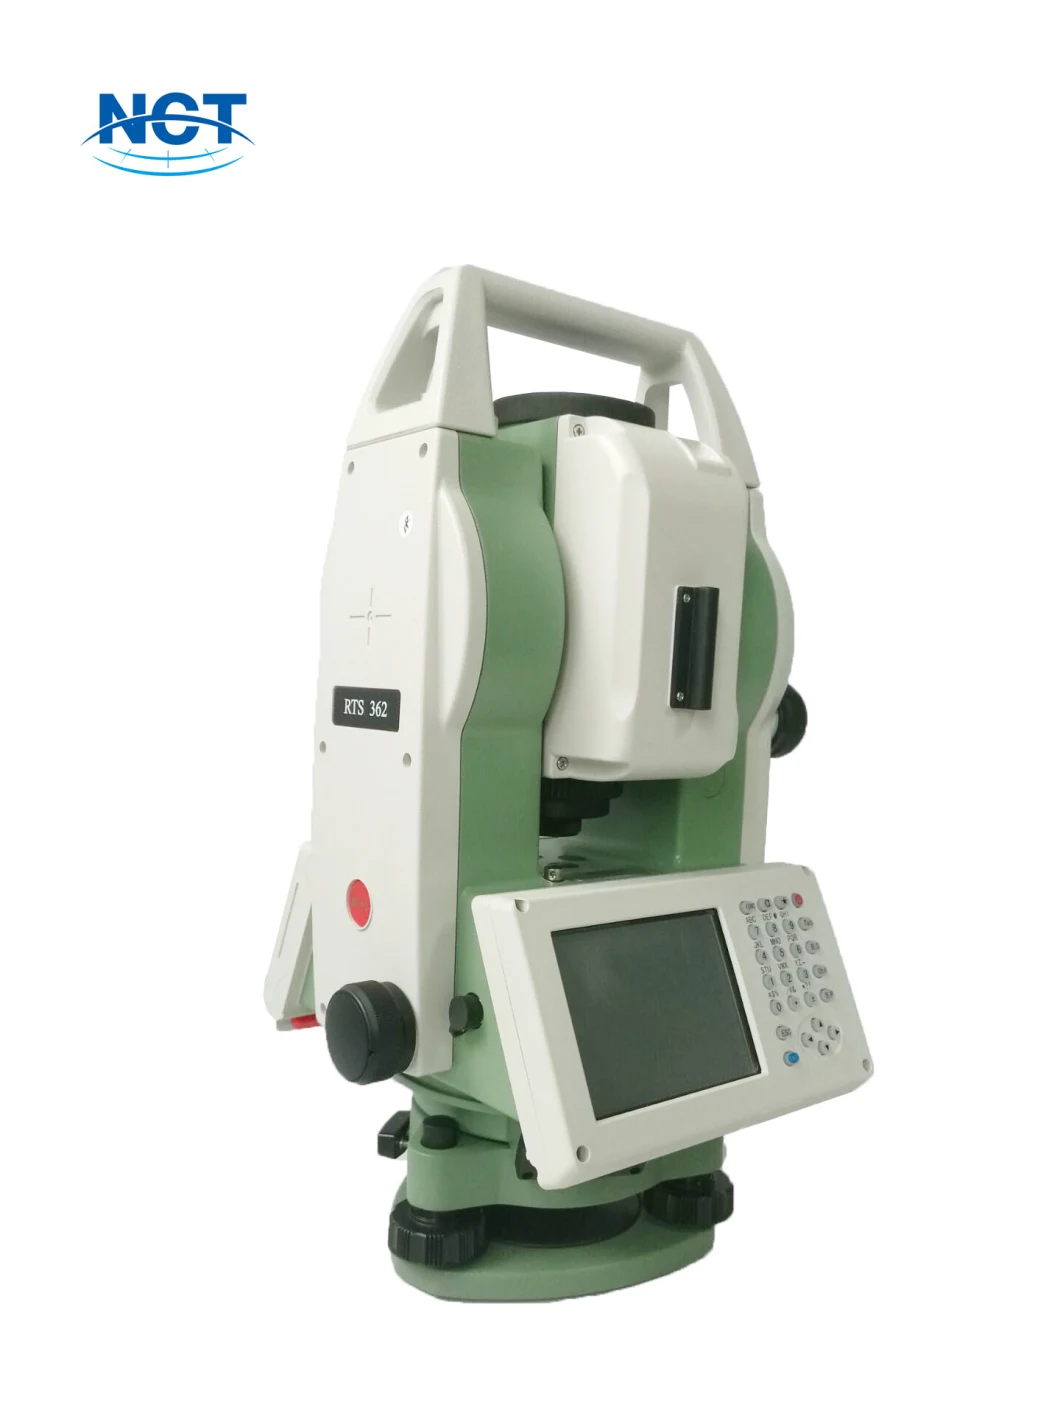 Windows CE 5.0 Operating System Foif Total Station Rts363